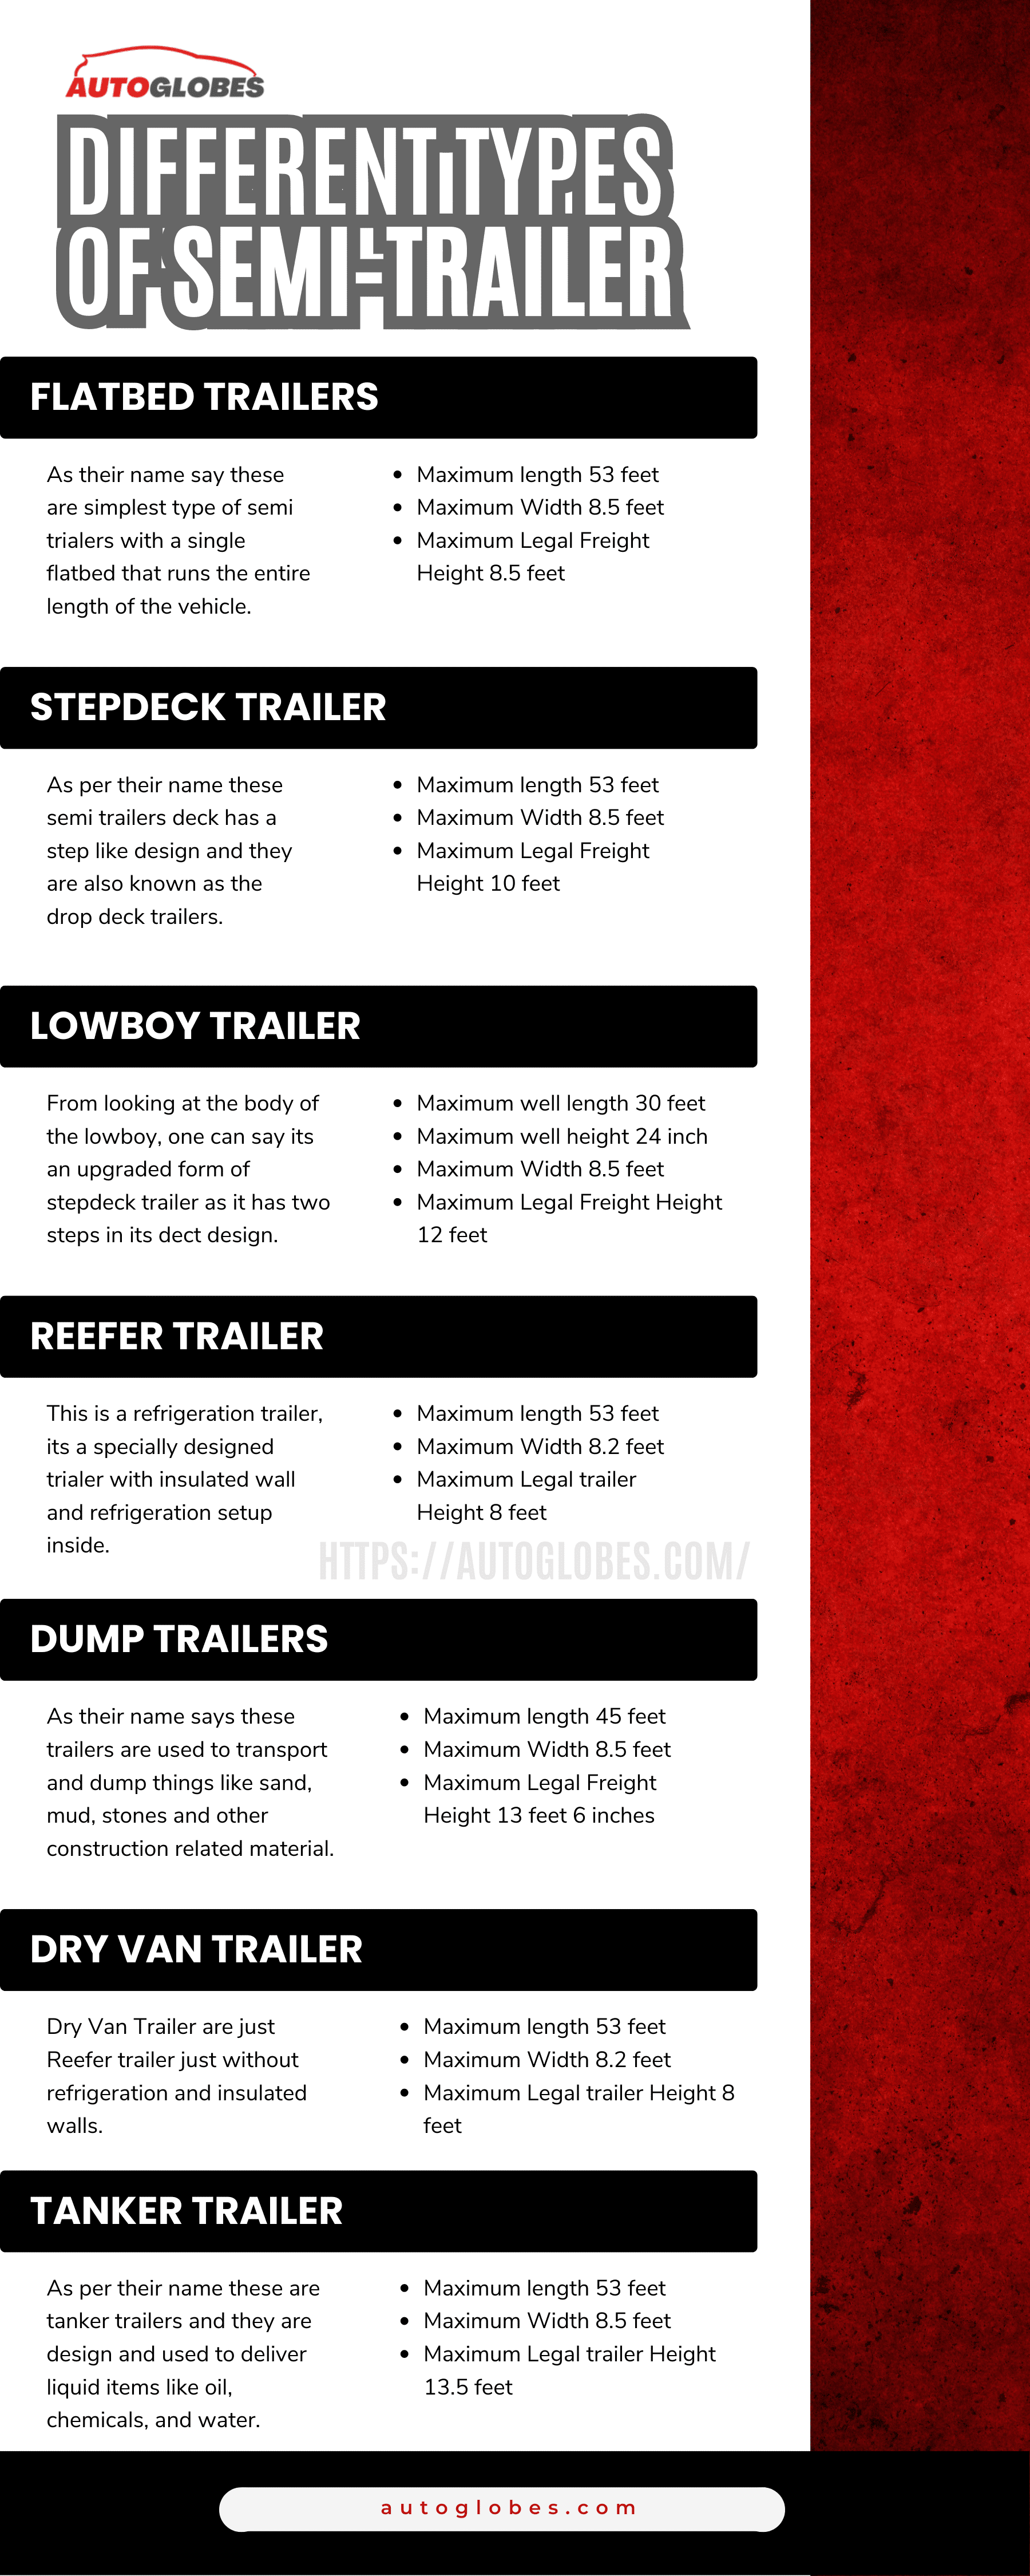 Different Types of Semi-Trailer Infographic